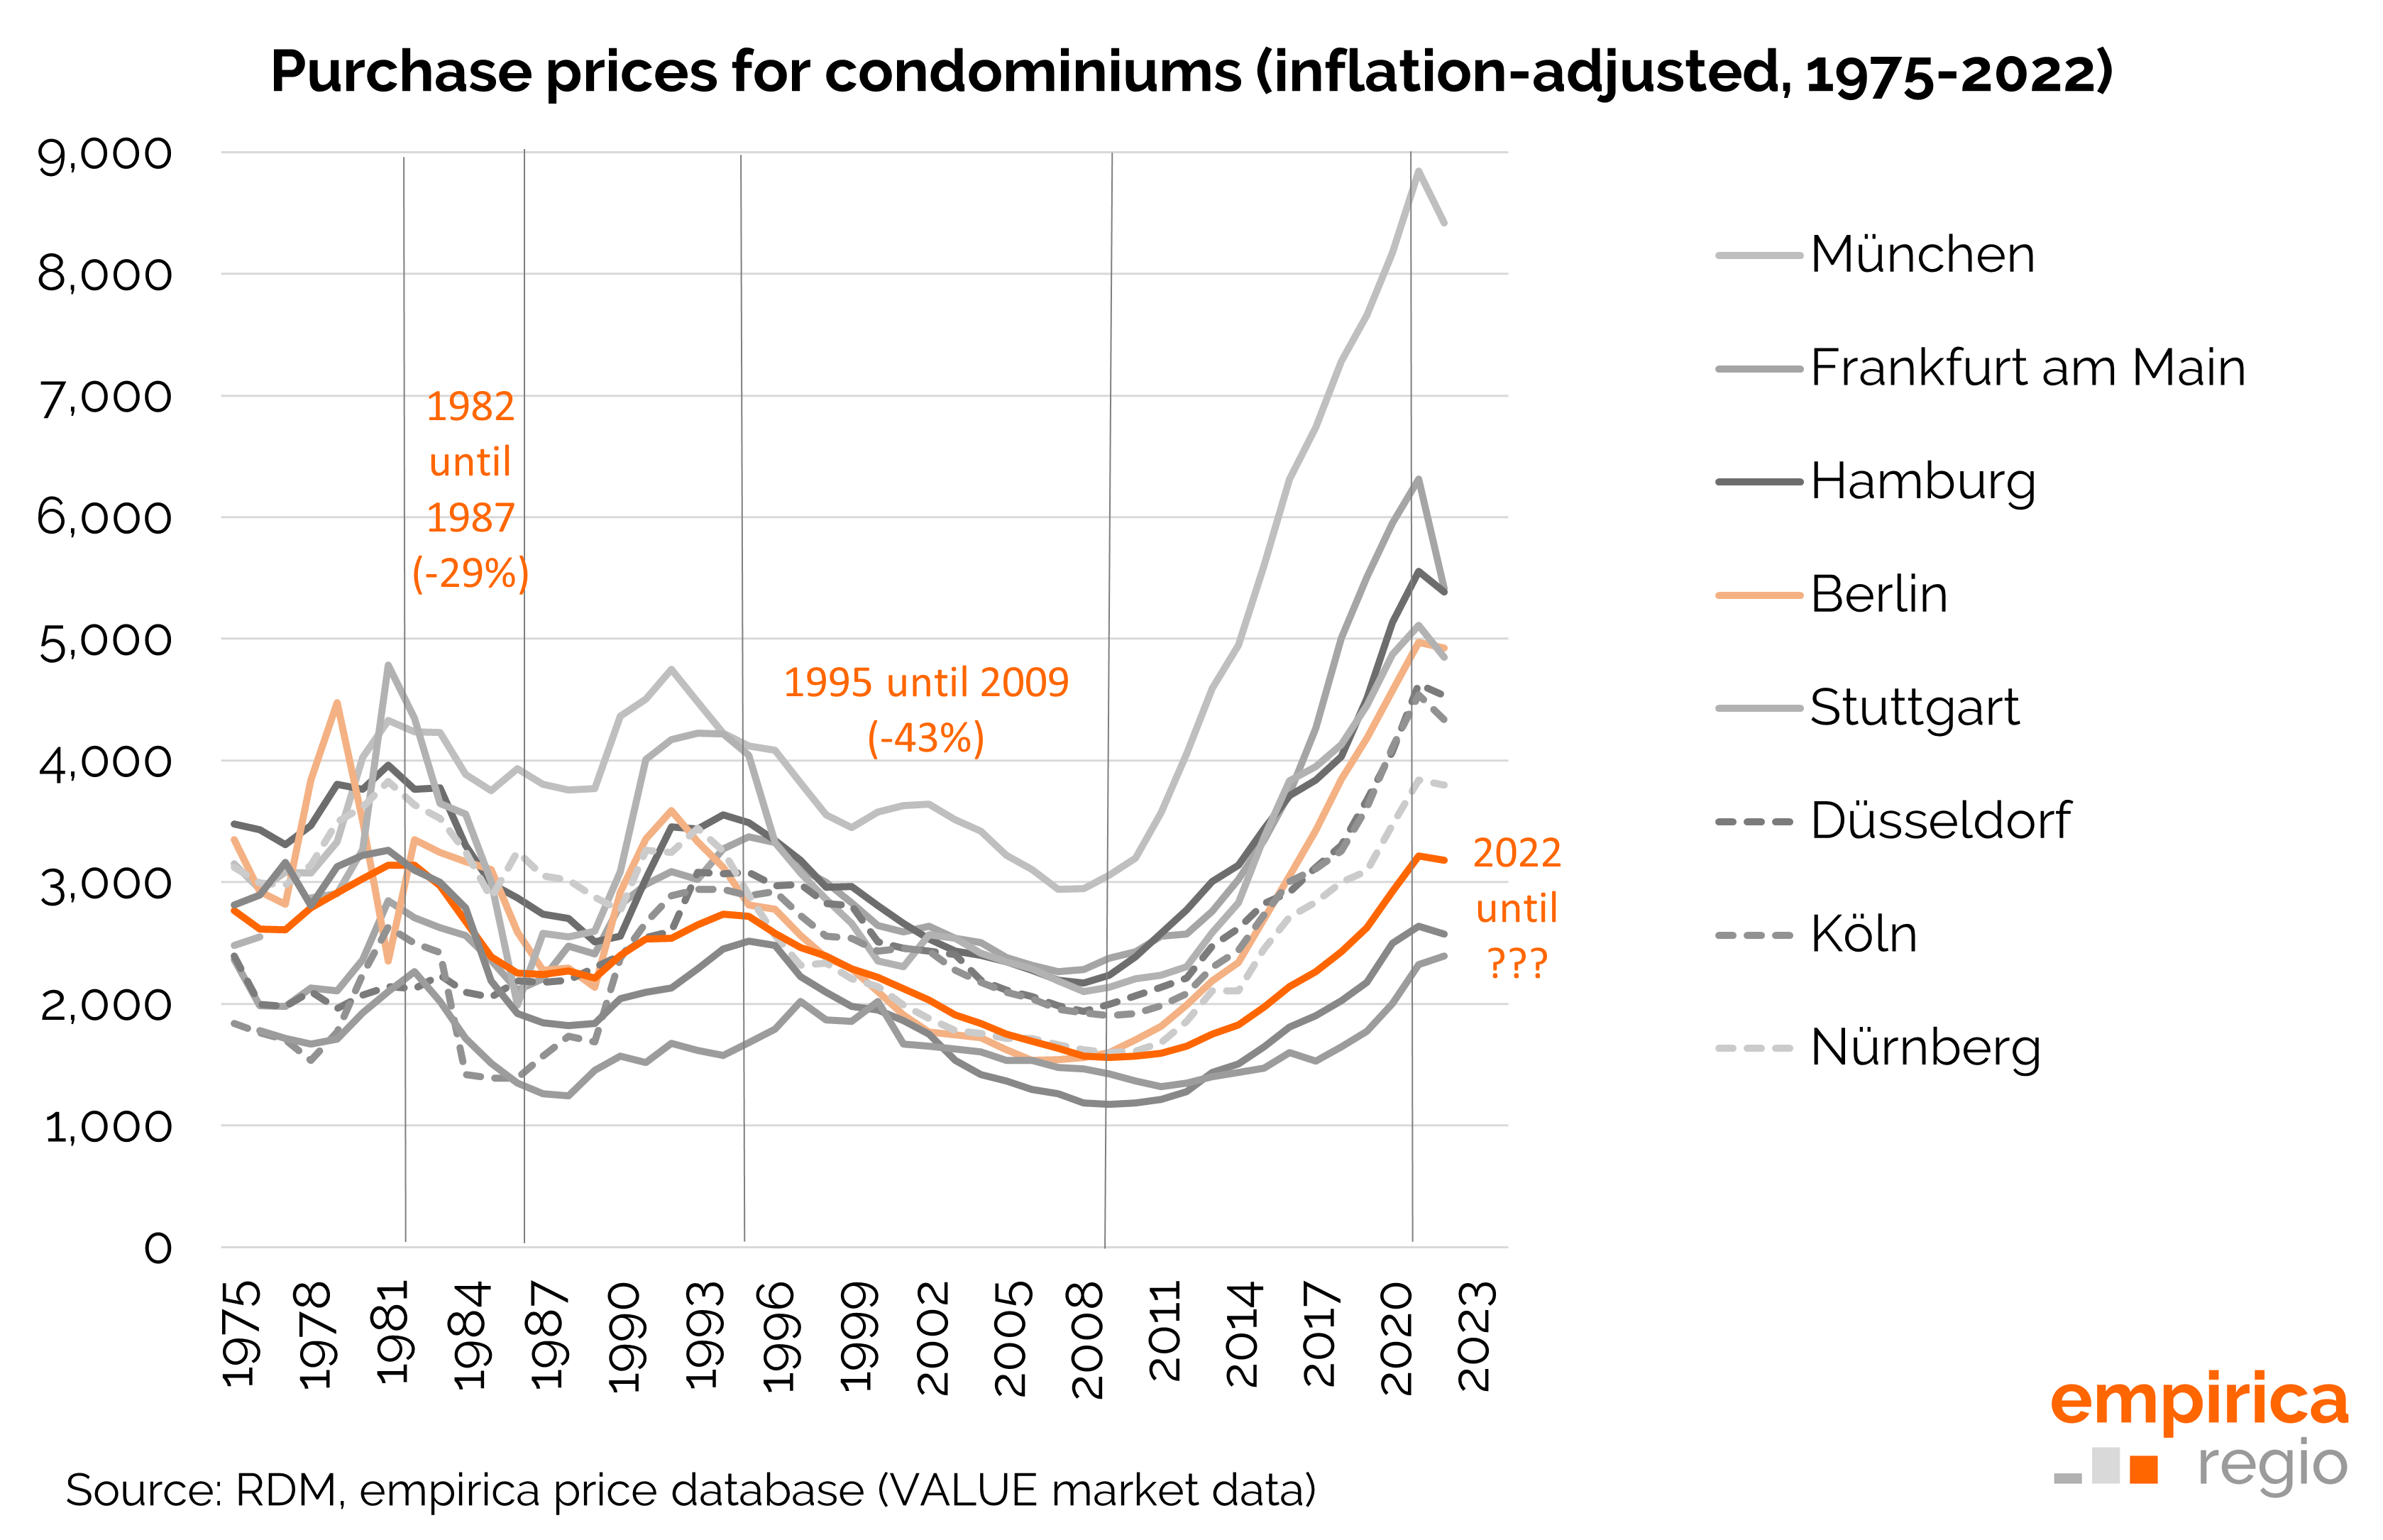 Inflation-adjusted development of purchase prices for condominiums in selected cities from 1975 to 2022